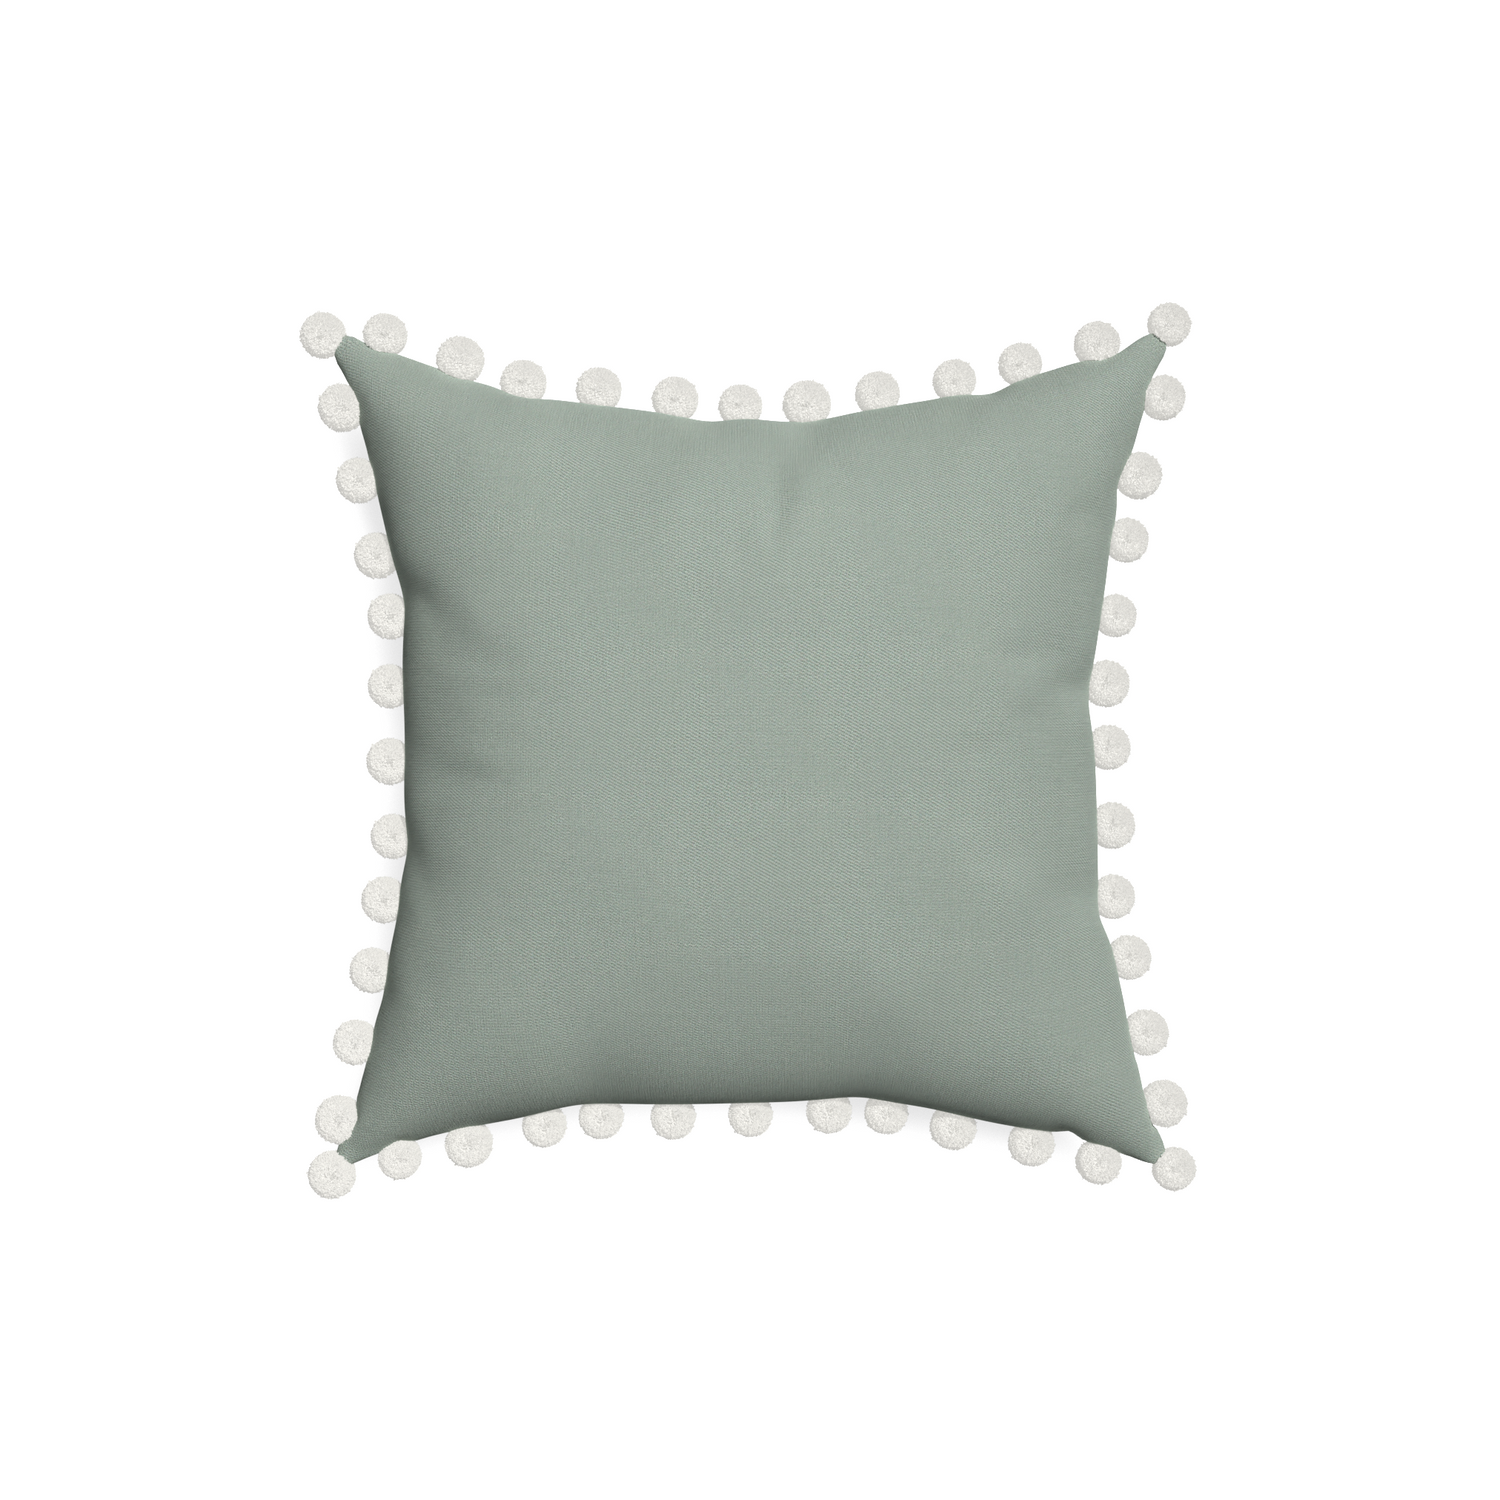 18-square sage custom sage green cottonpillow with snow pom pom on white background